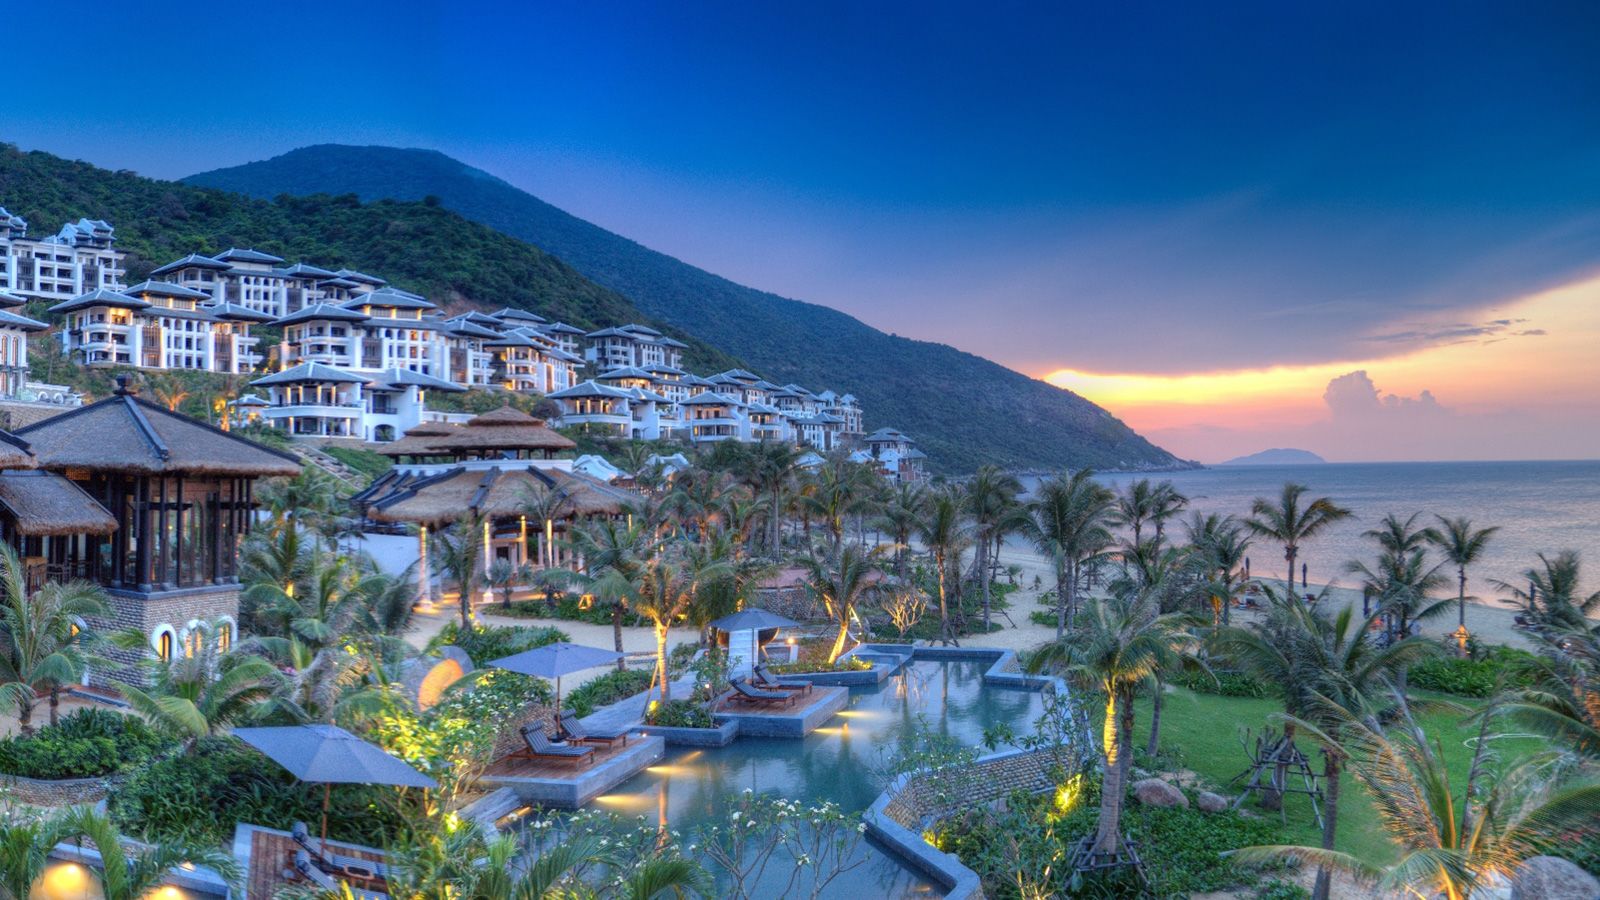 10 of Da Nang's best beach hotels for your vacation in Vietnam | CNN